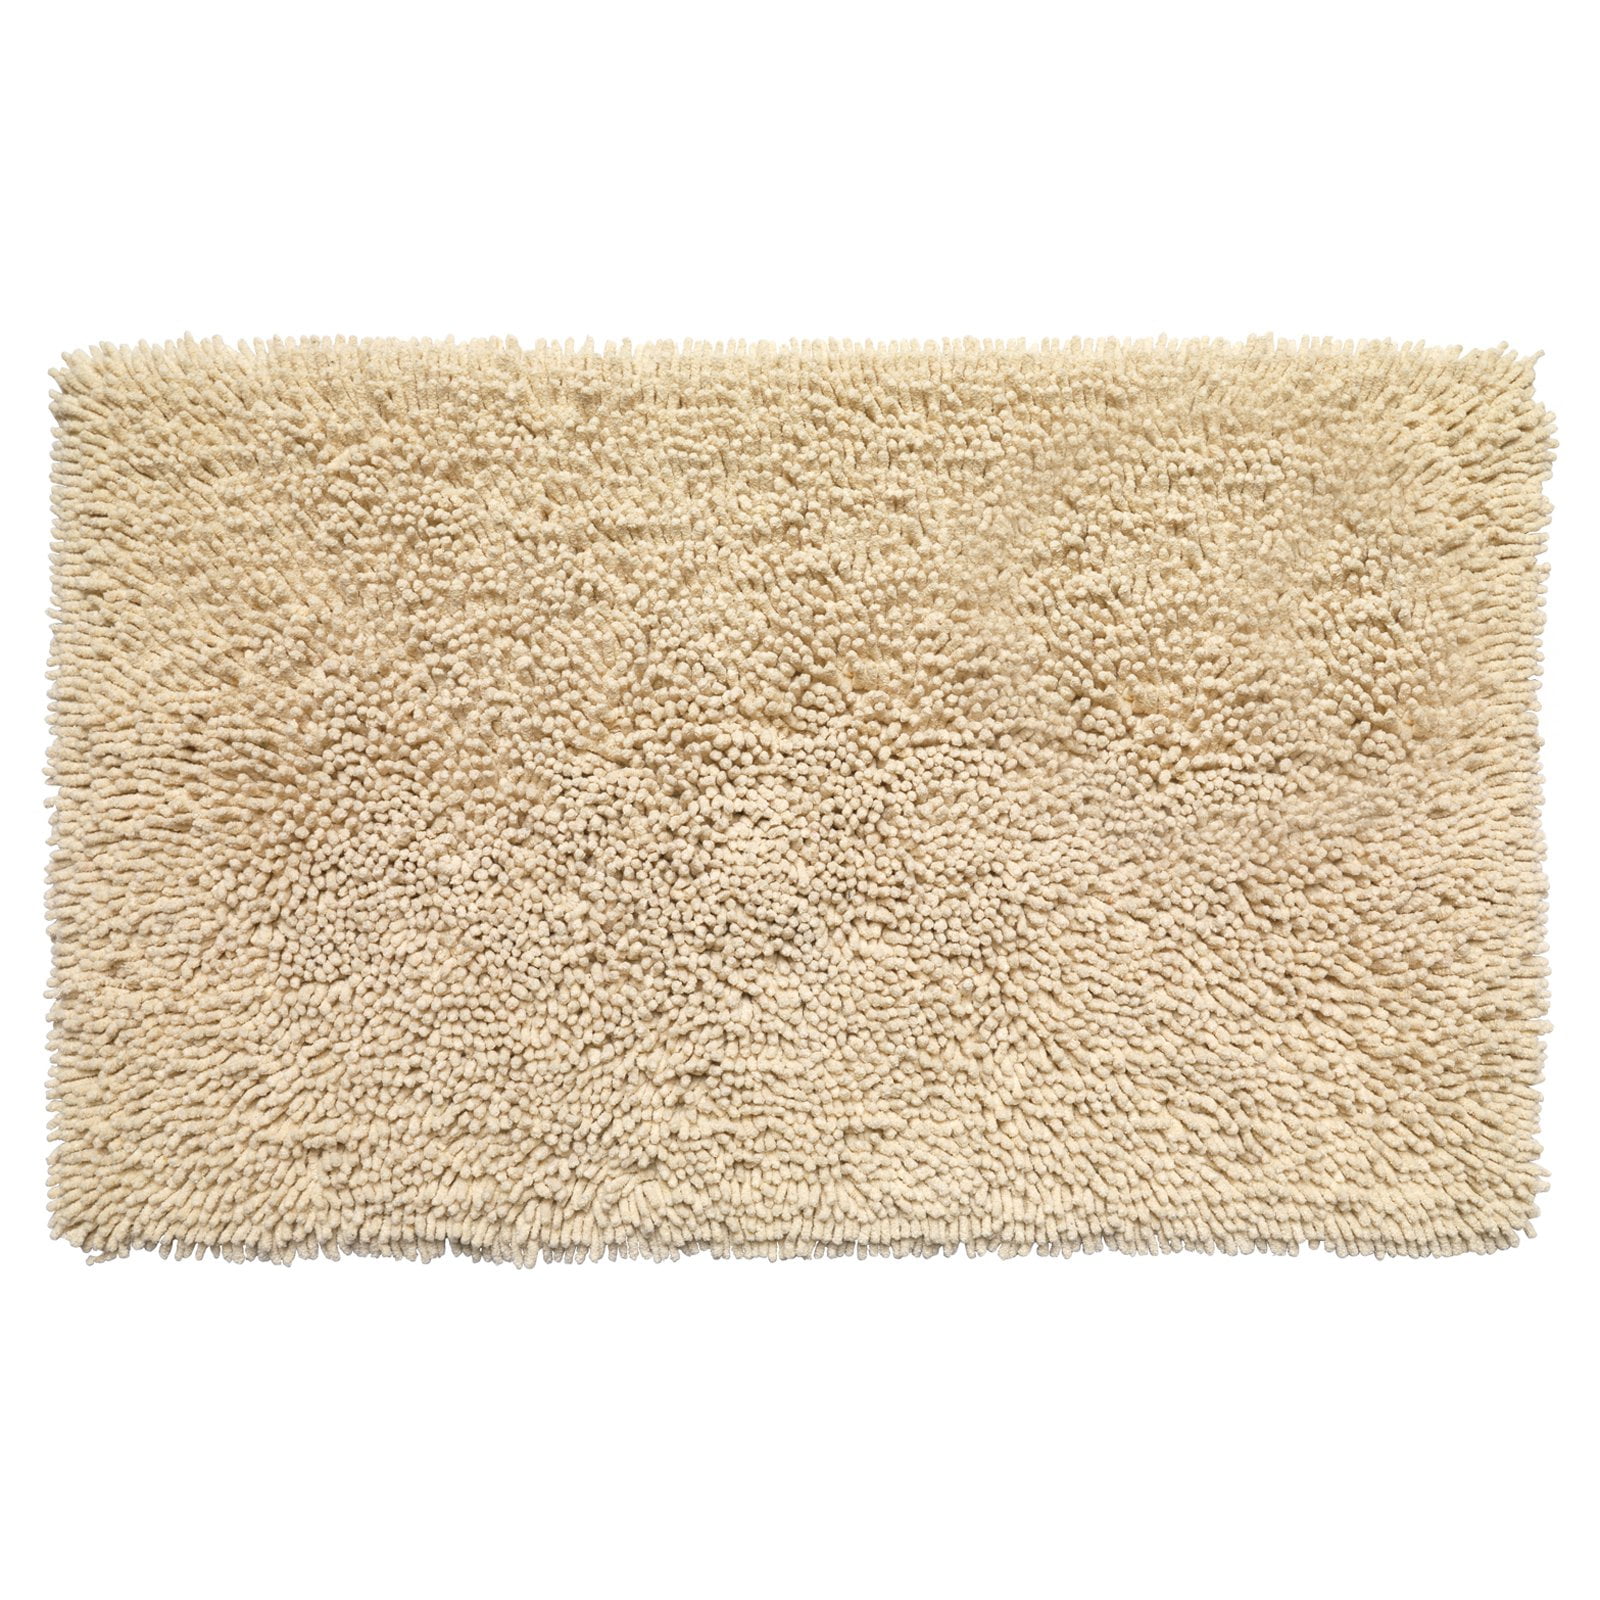 Sweet Home Collection Shaggy Chenille Cotton Noodle Bathroom Rug ...